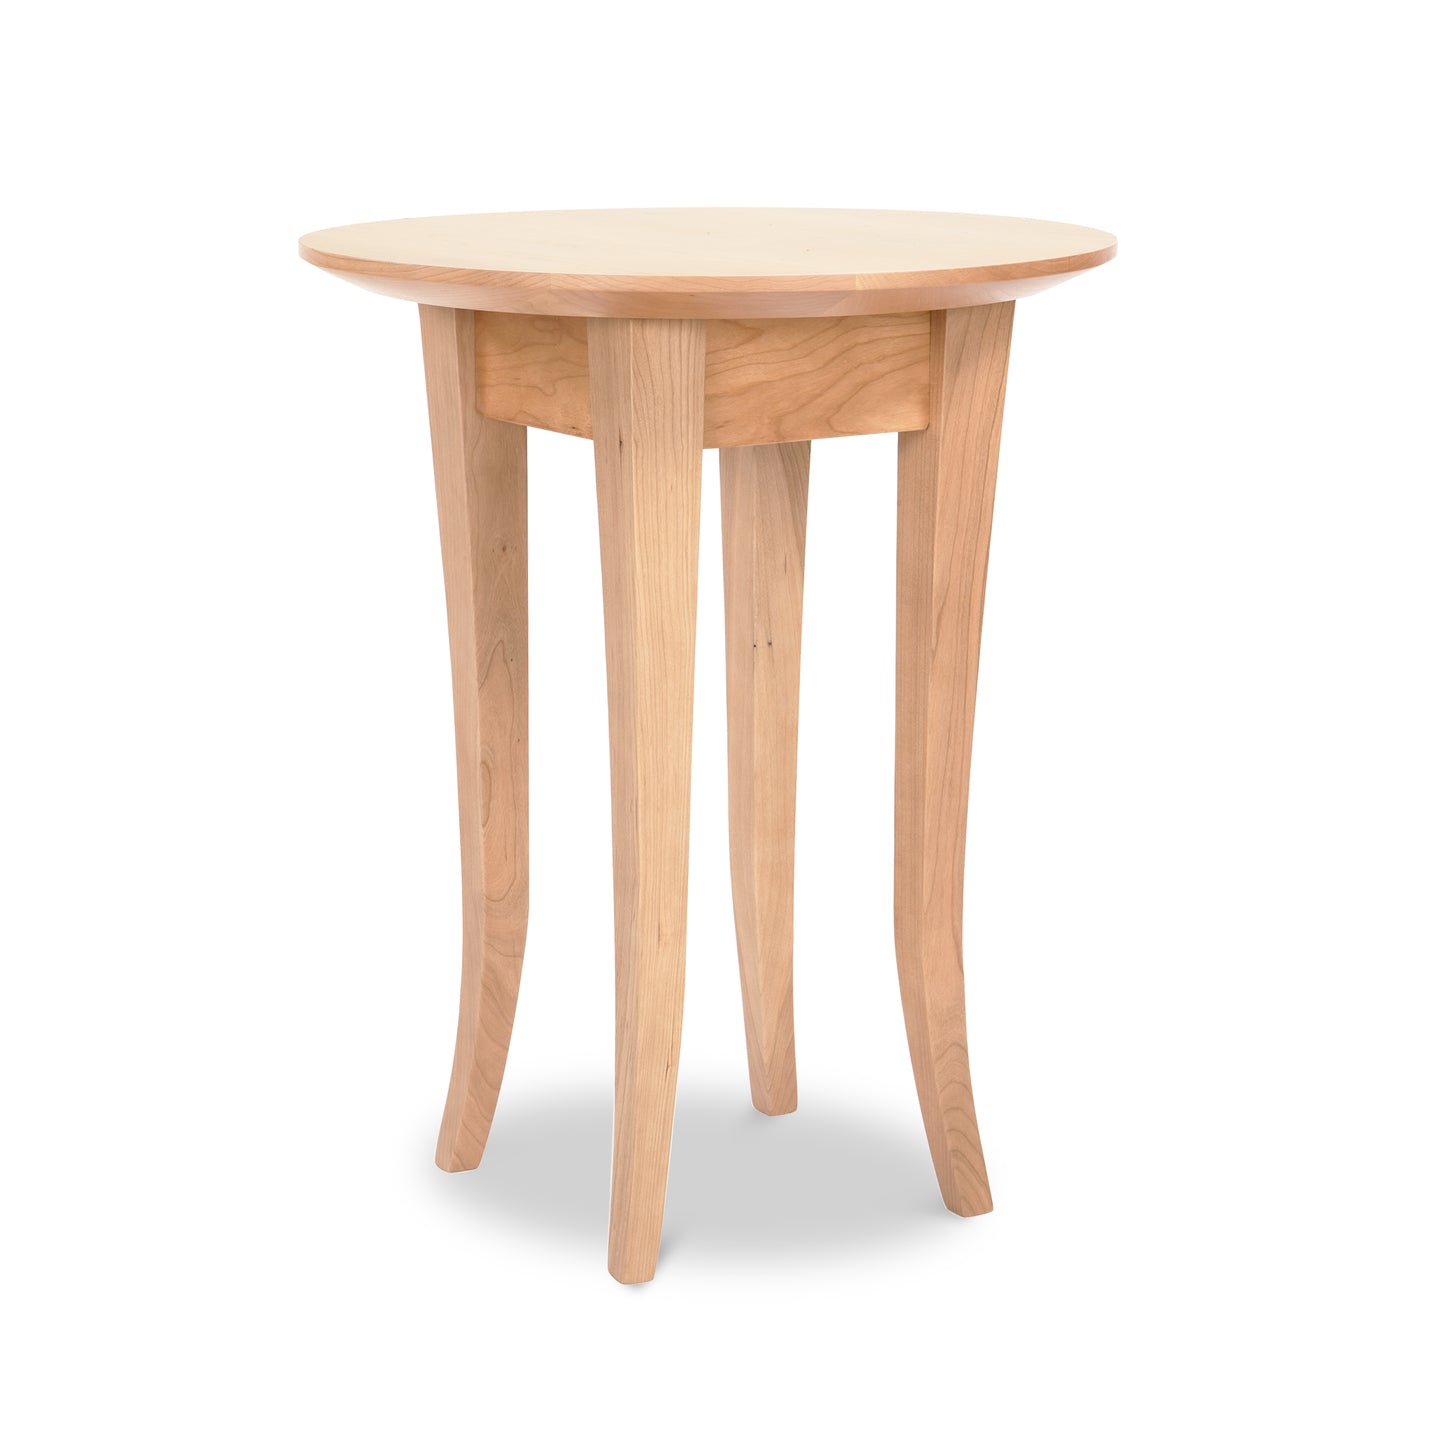 A Classic Shaker Round Flare Leg End Table from Lyndon Furniture, with slender, slightly curved legs, isolated on a white background.